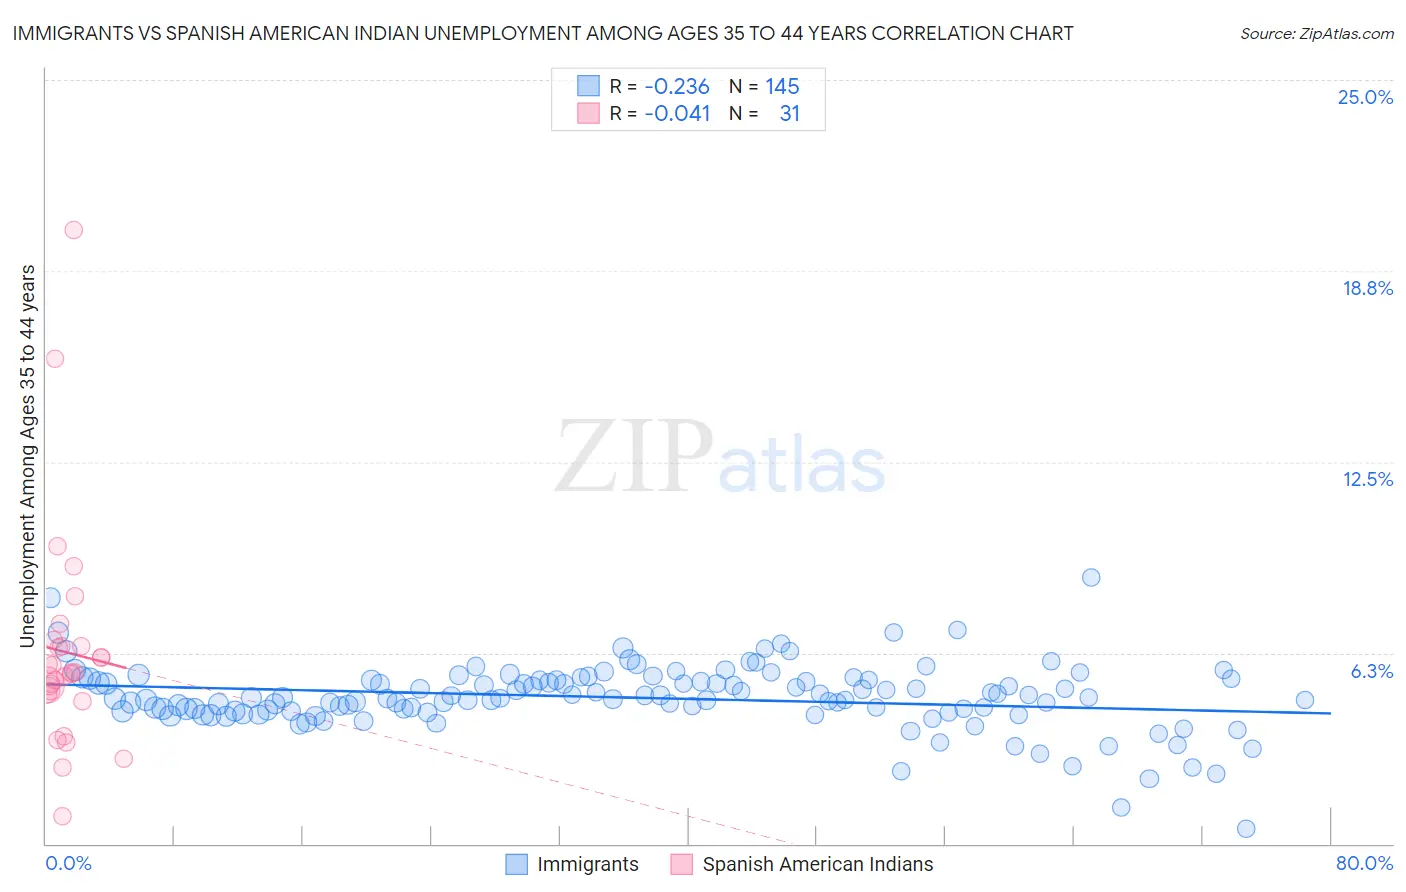 Immigrants vs Spanish American Indian Unemployment Among Ages 35 to 44 years